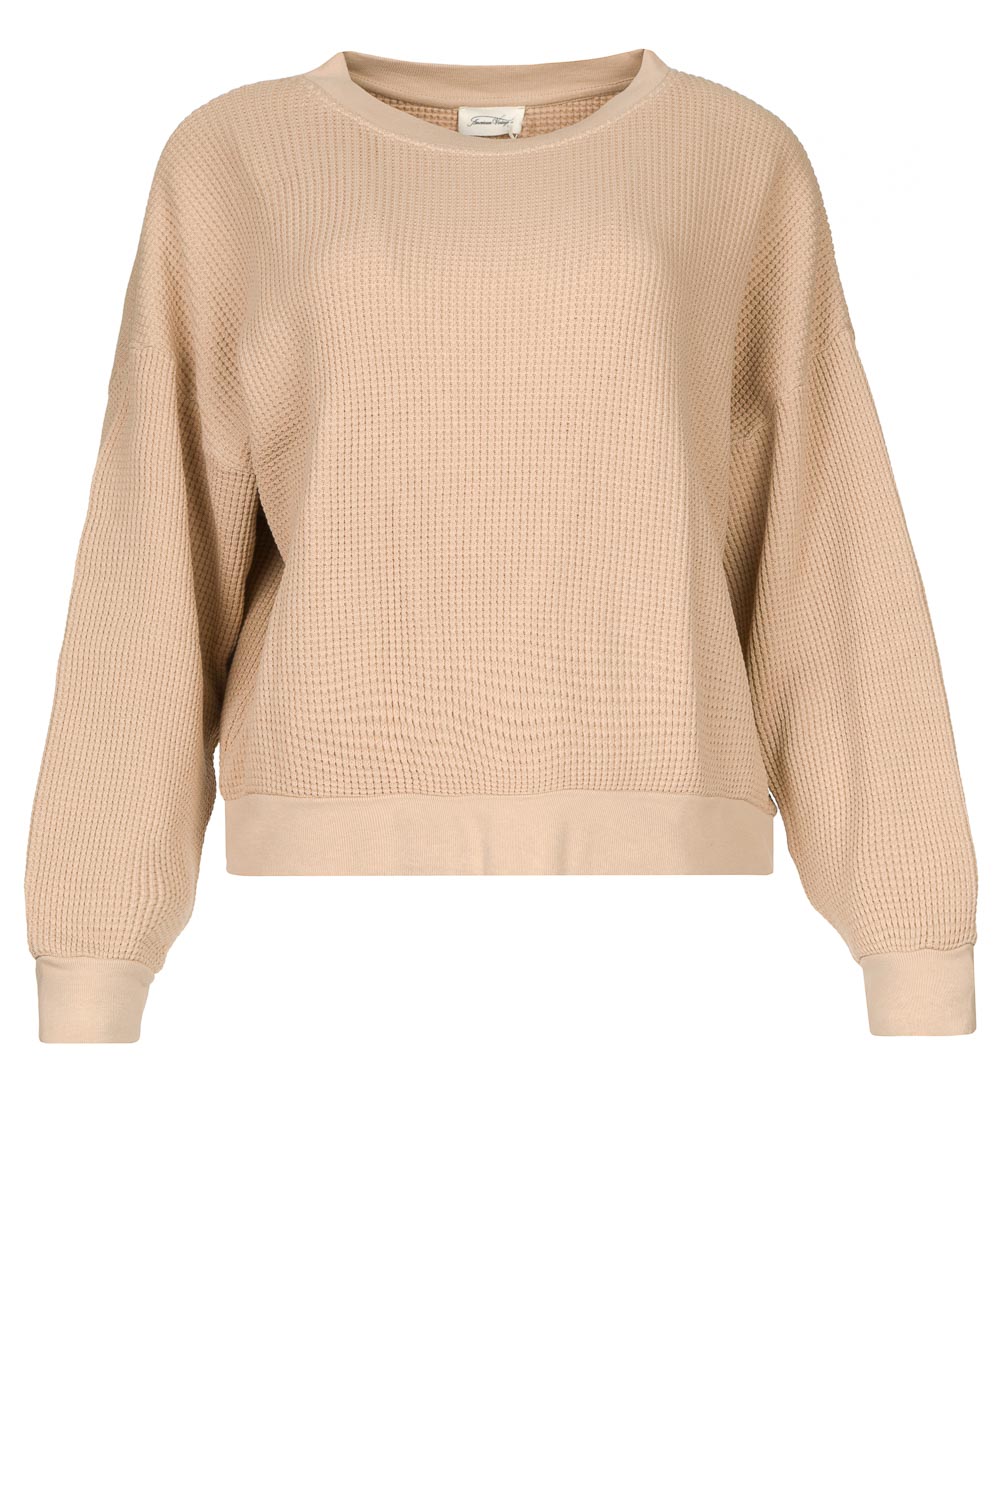 De Matrix Actie Cotton sweater with waffle fabric Bowilove | nude... | American Vintage |  Little Soho